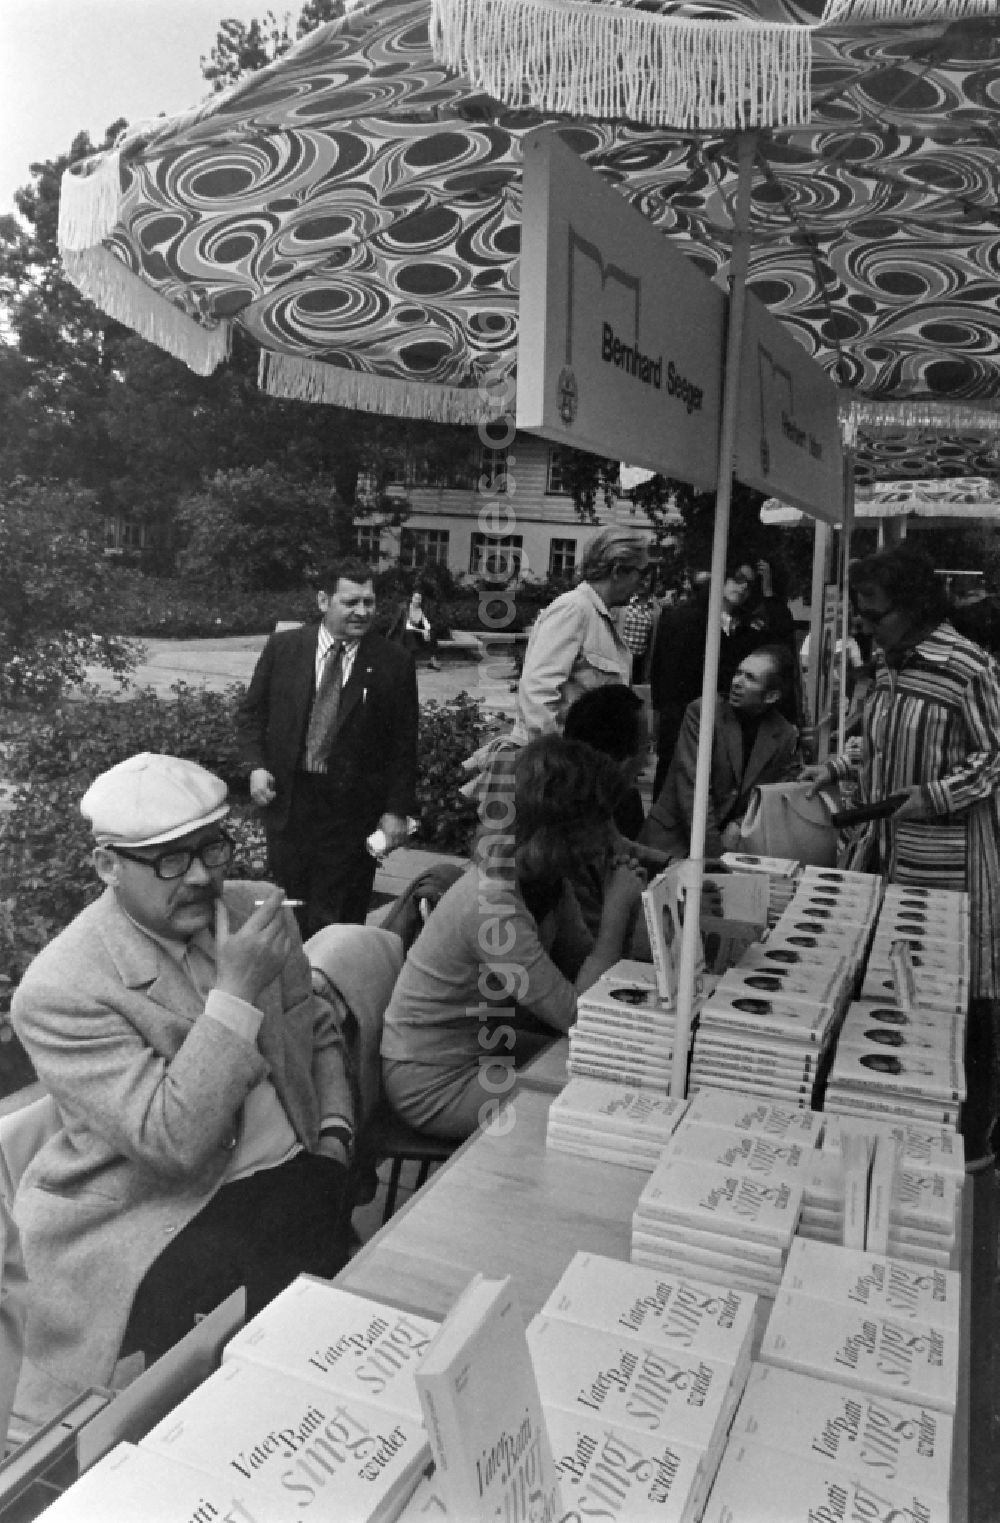 Erfurt: Writers' bazaar on the grounds of the IGA in the Rose Garden on the occasion of the 15th Workers' Festival in Erfurt in the federal state of Thuringia in the territory of the former GDR, German Democratic Republic. Bernhard Seeger ( author ) with his books at the book bazaar